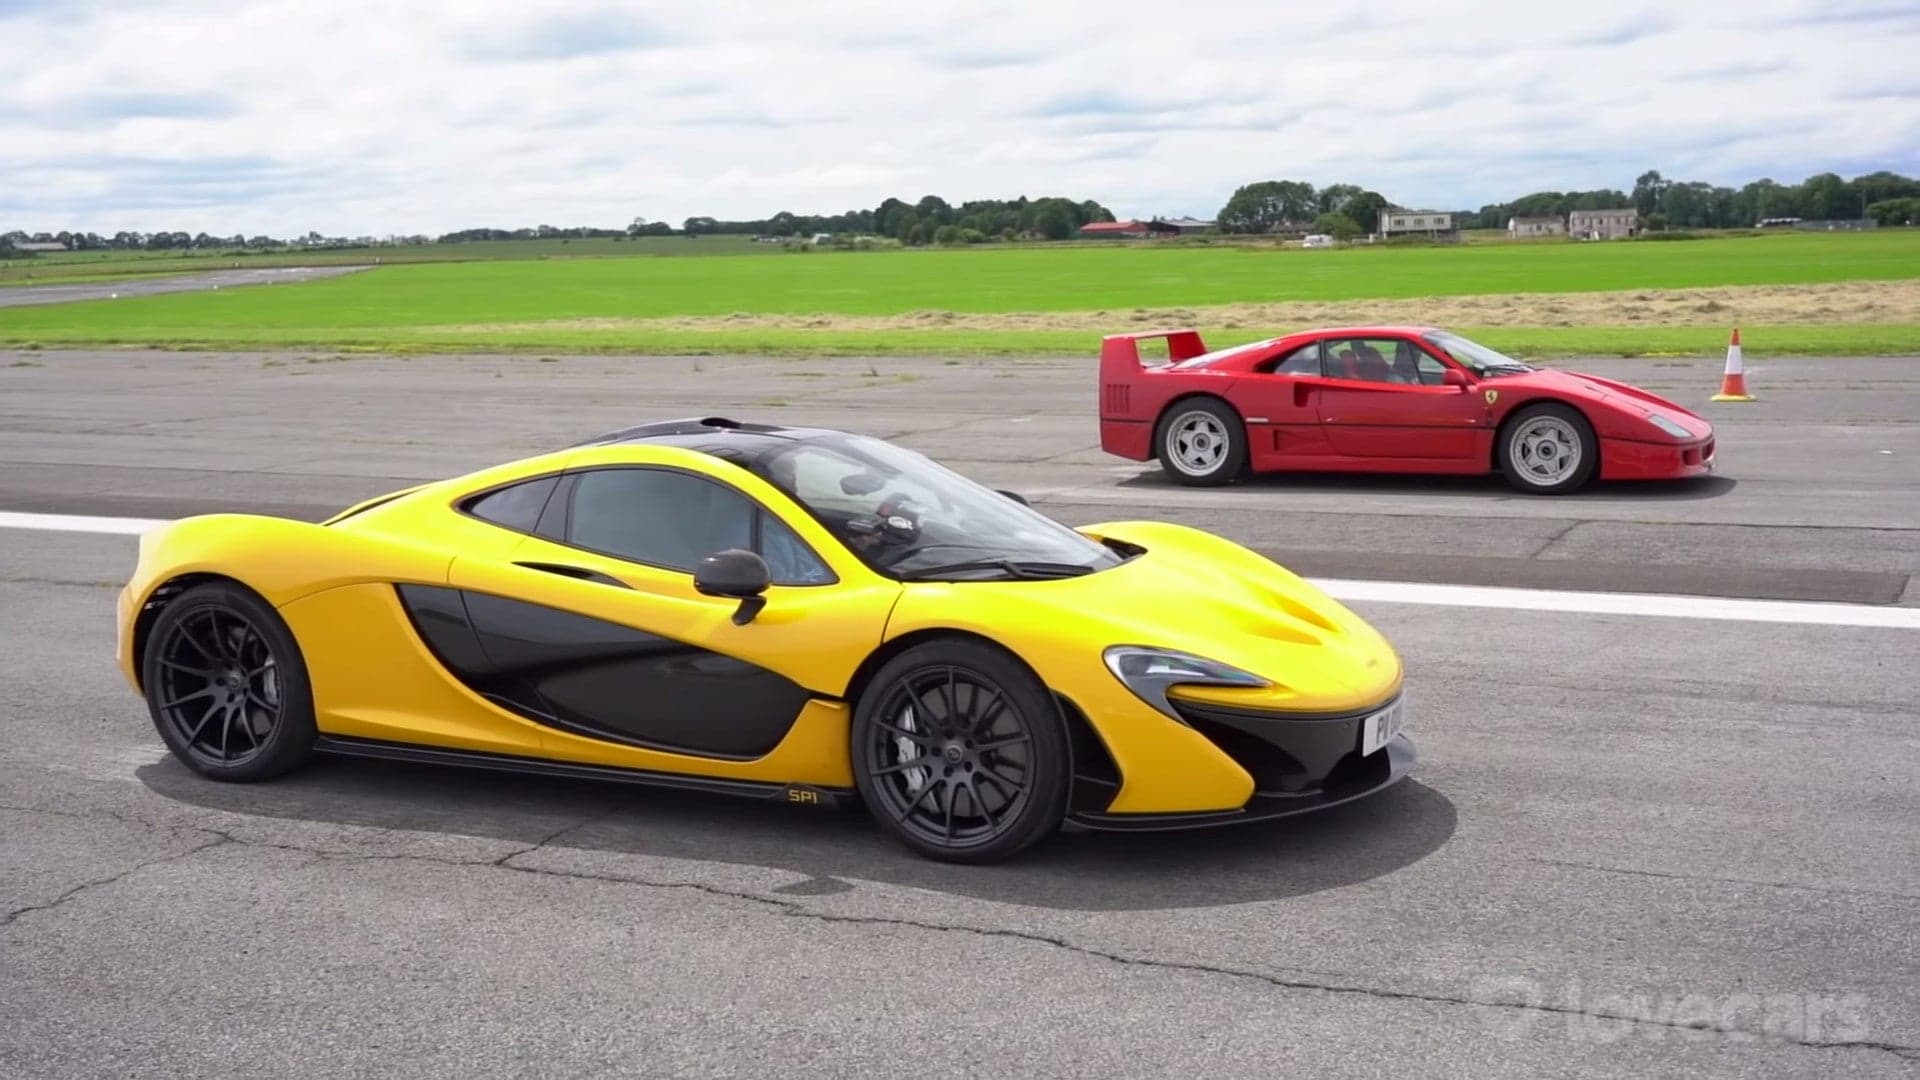 Ferrari F40 vs. McLaren P1 Drag Race Shows What a Difference 25 Years Can Make